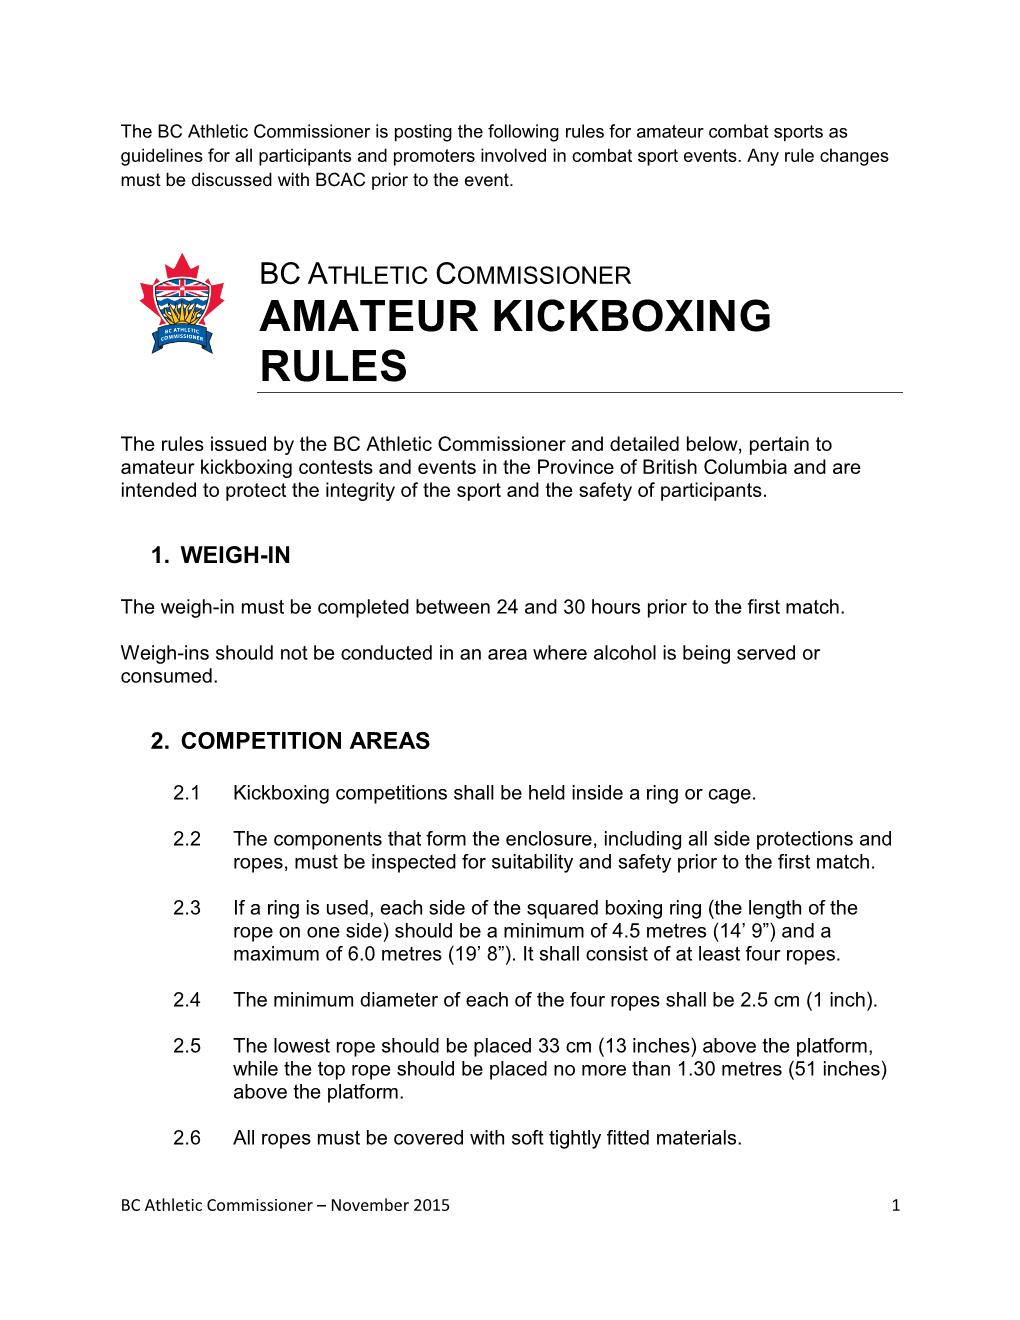 BC Athletic Commissioner Is Posting the Following Rules for Amateur Combat Sports As Guidelines for All Participants and Promoters Involved in Combat Sport Events